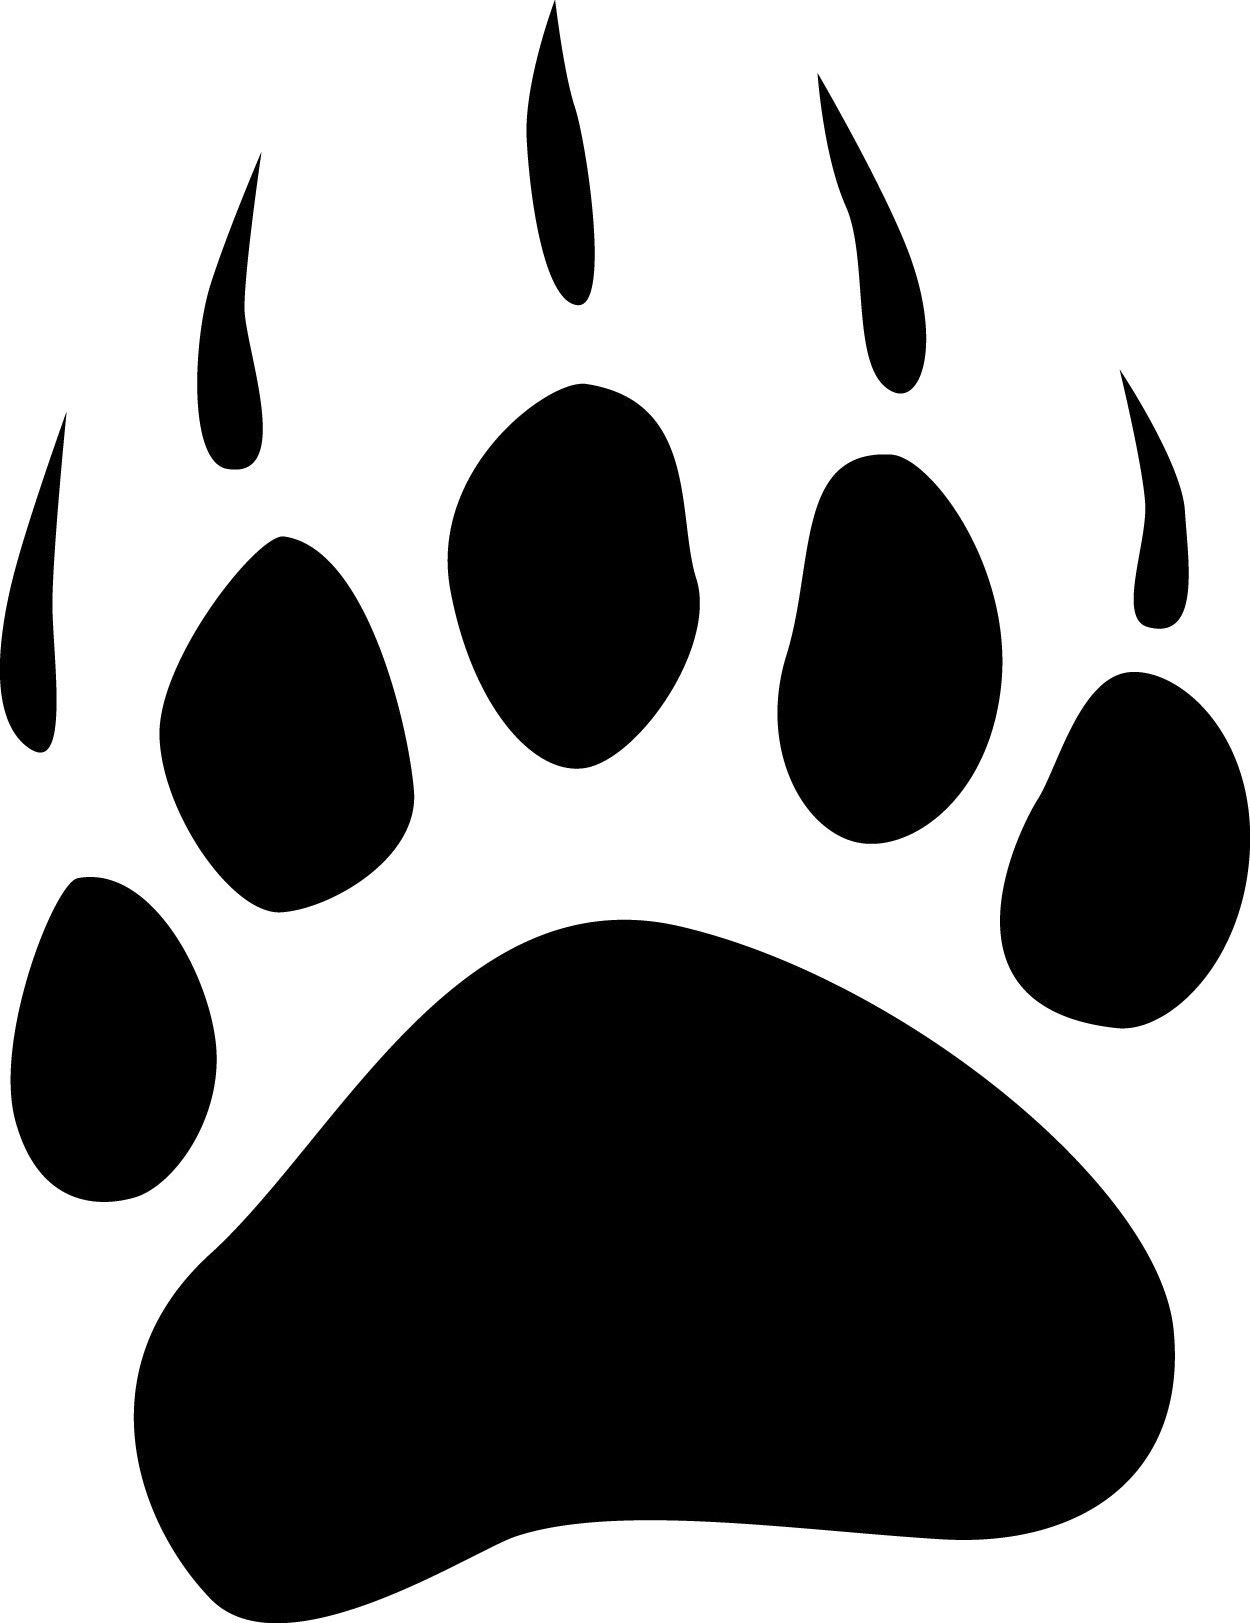 Free Printable Paw Prints - Clipart library